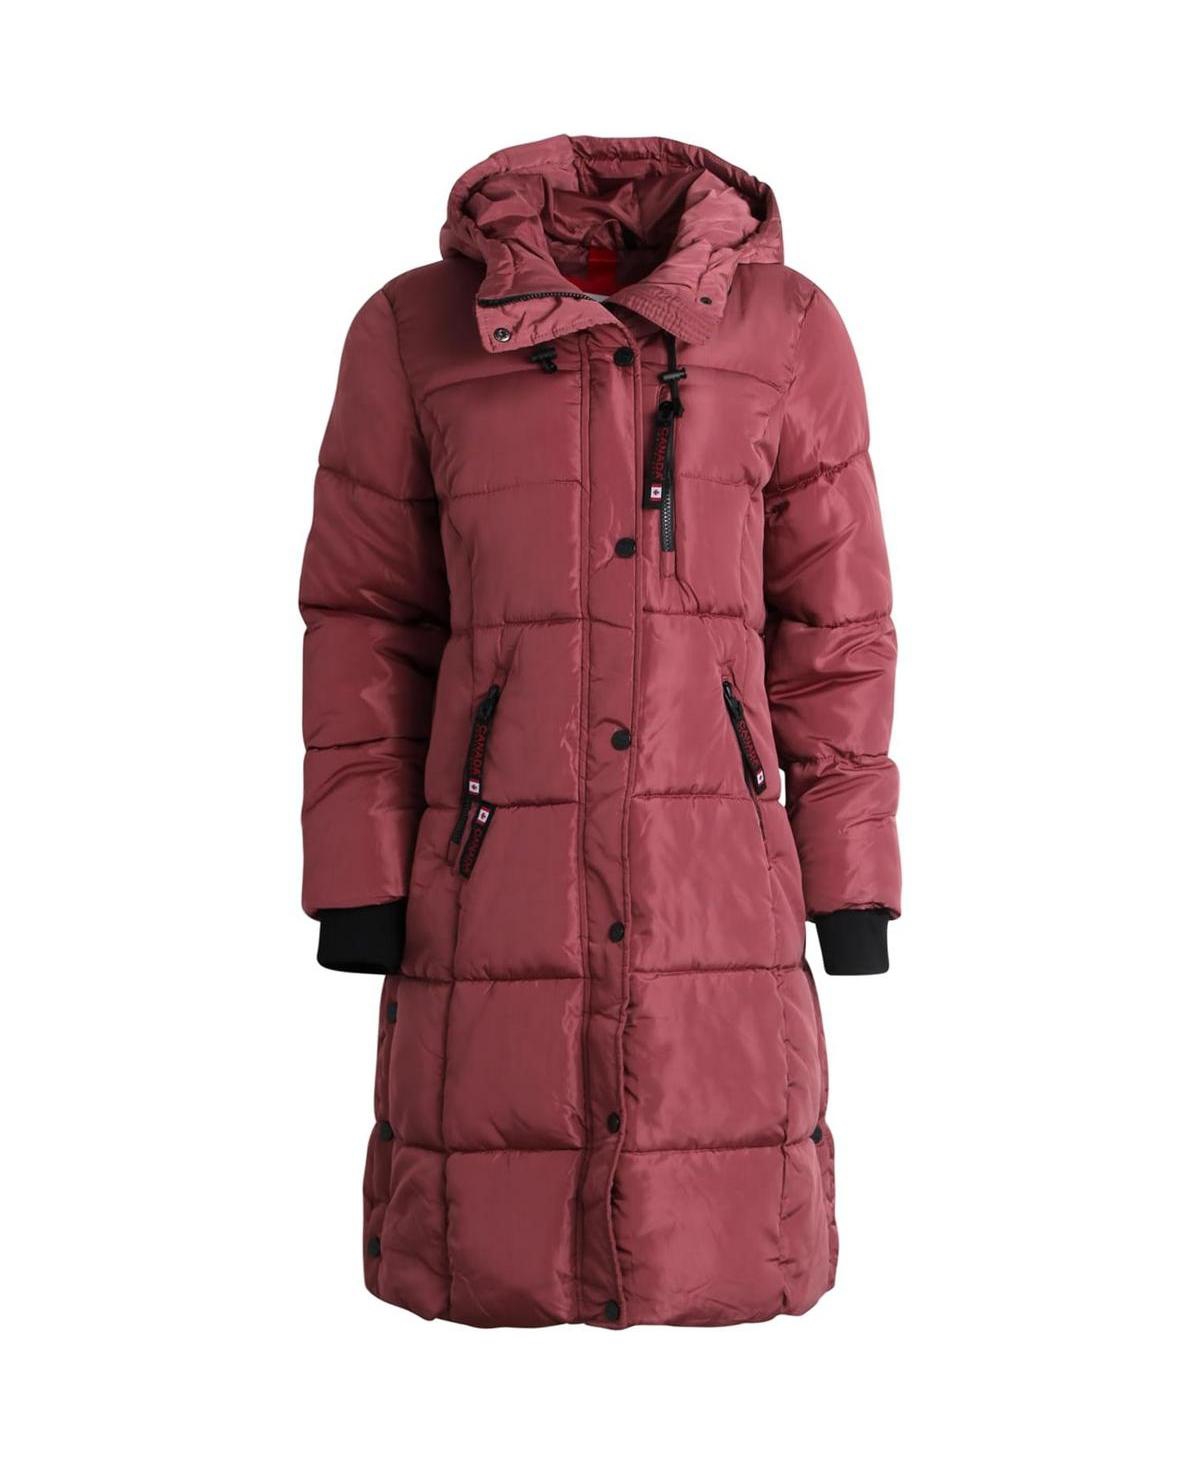 Women's Quilted Long Puffer Jacket - Wild ginger